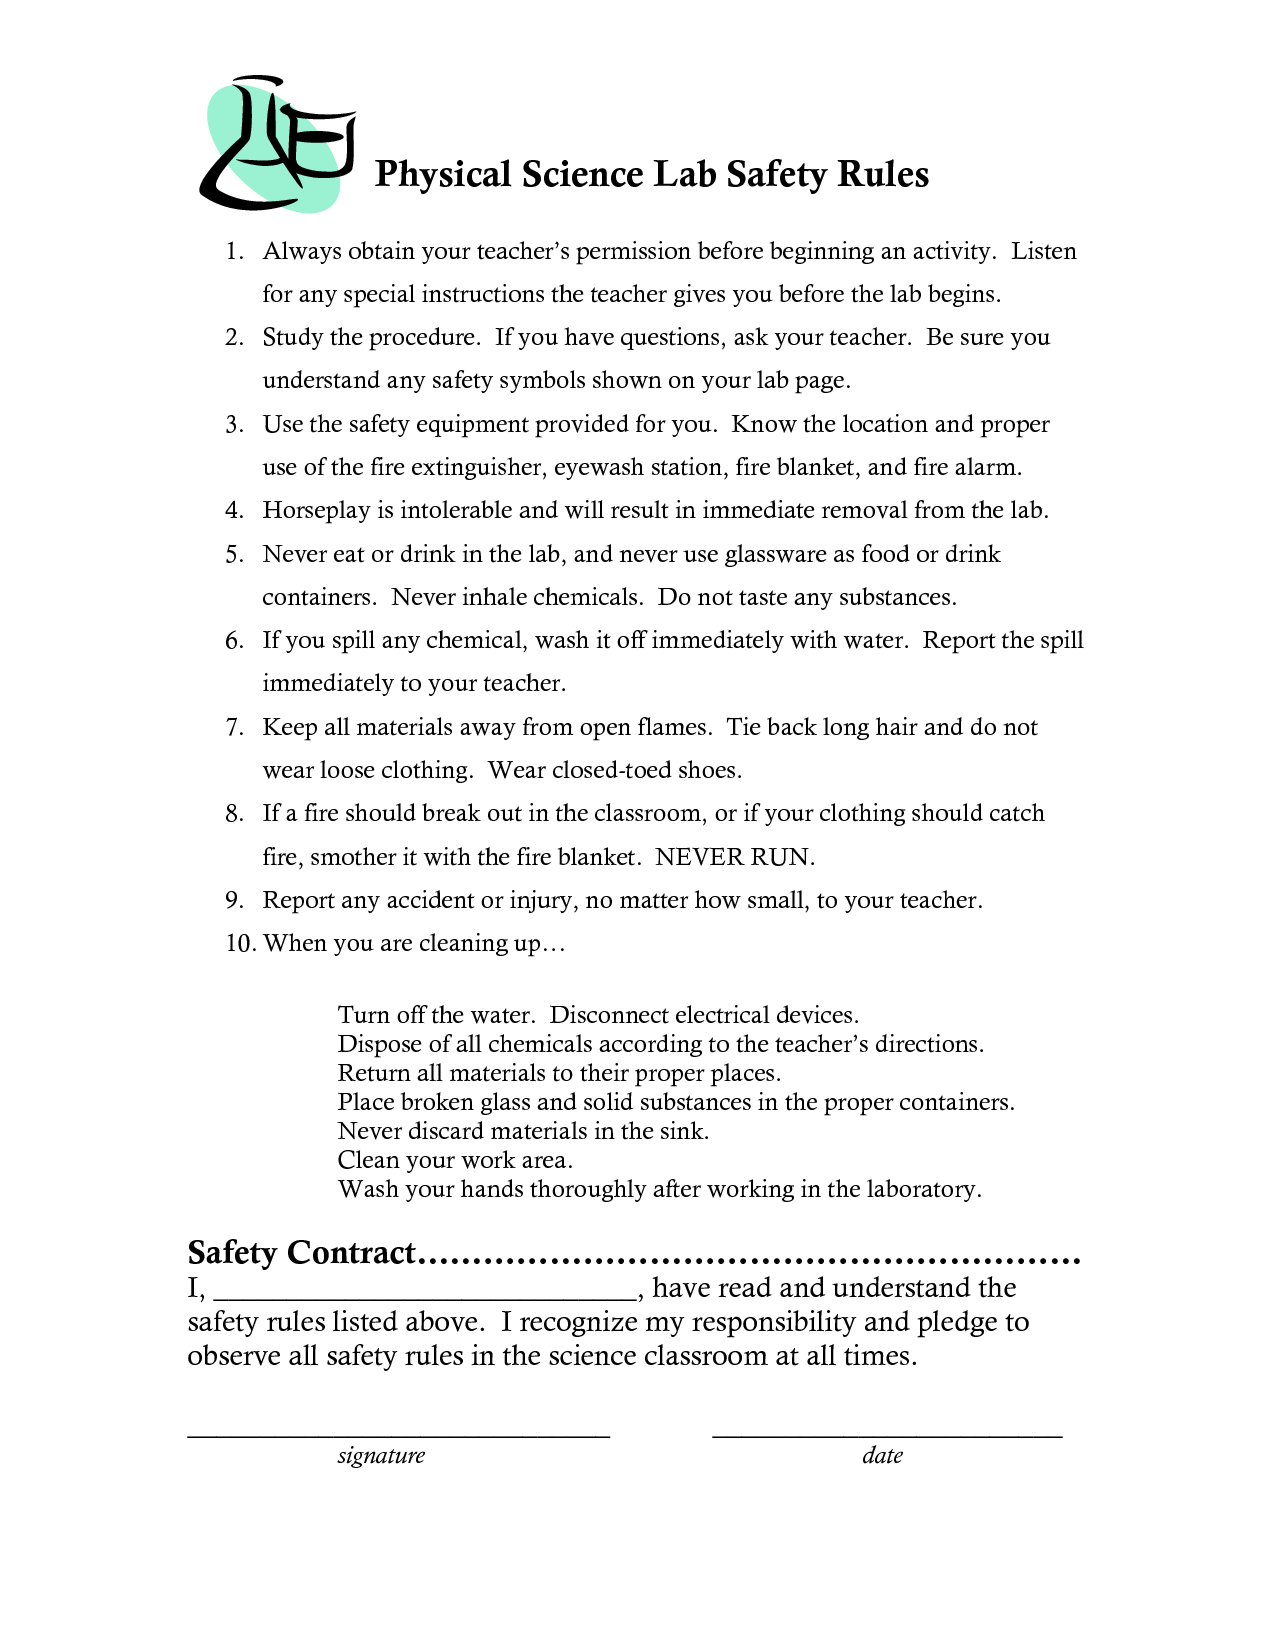 15 Best Images of Science Laboratory Safety Rules Worksheet ...